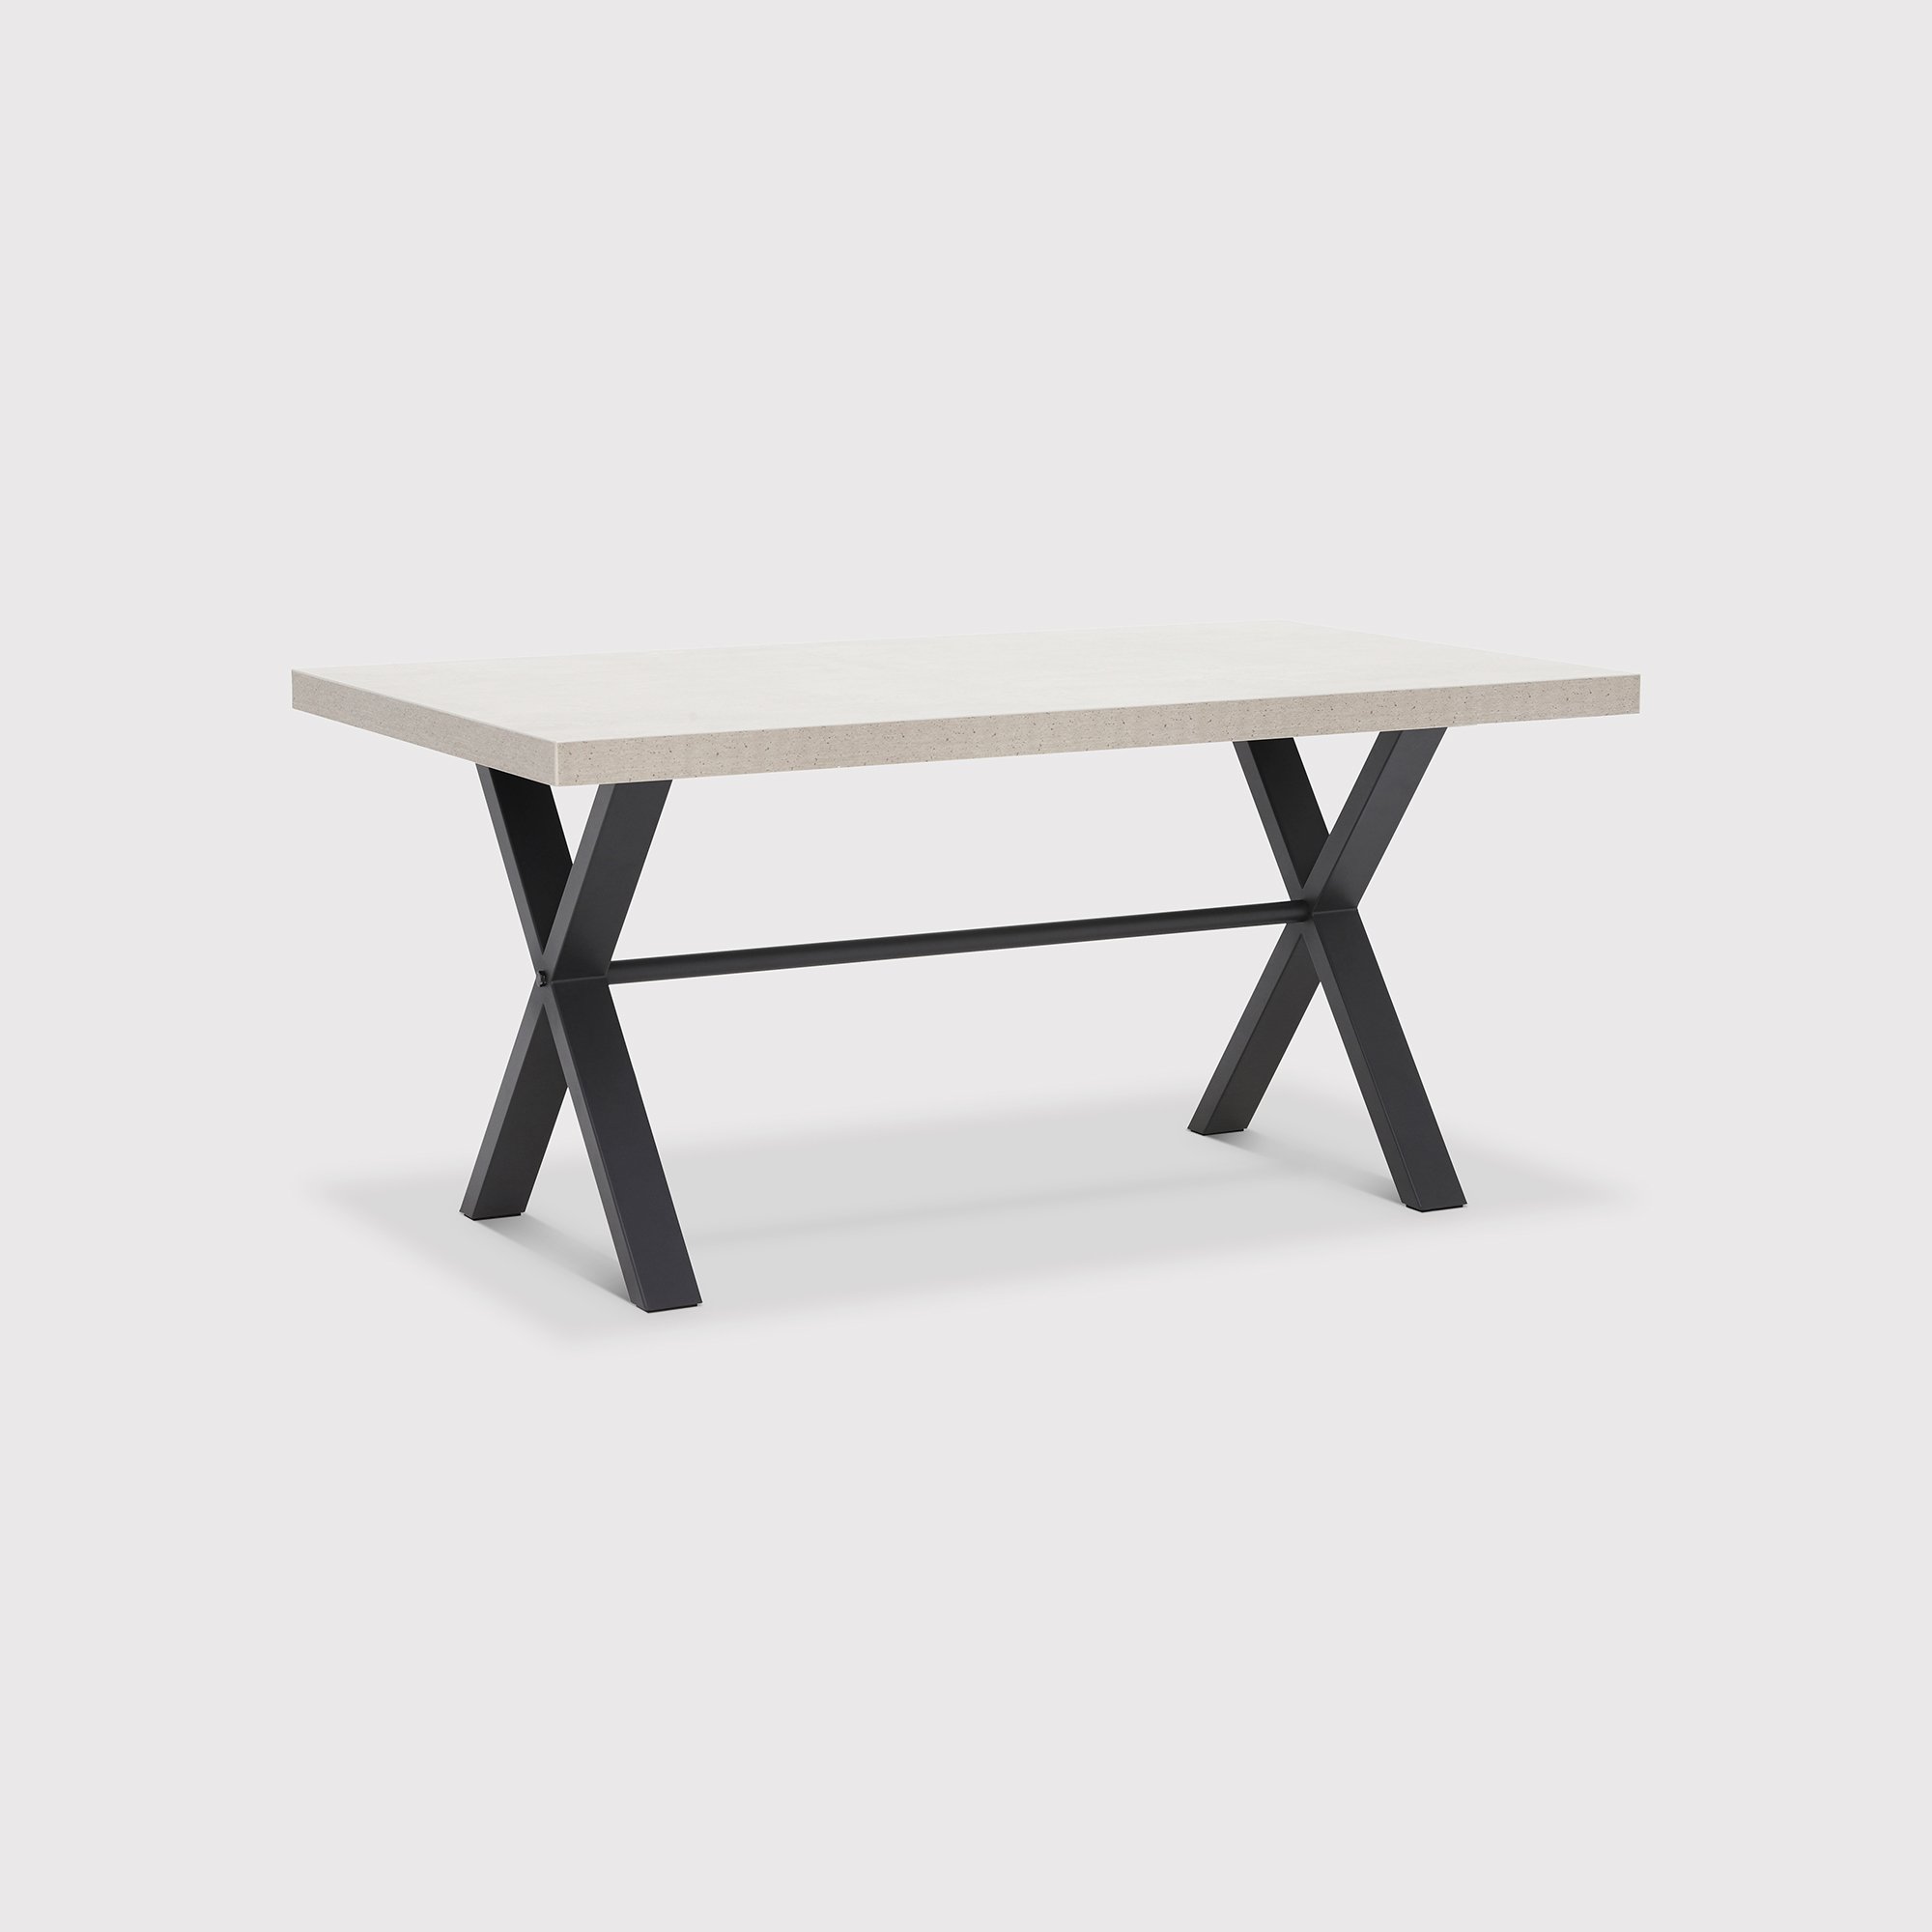 Photo of Kalmer fixed industrial dining table 160cm in grey